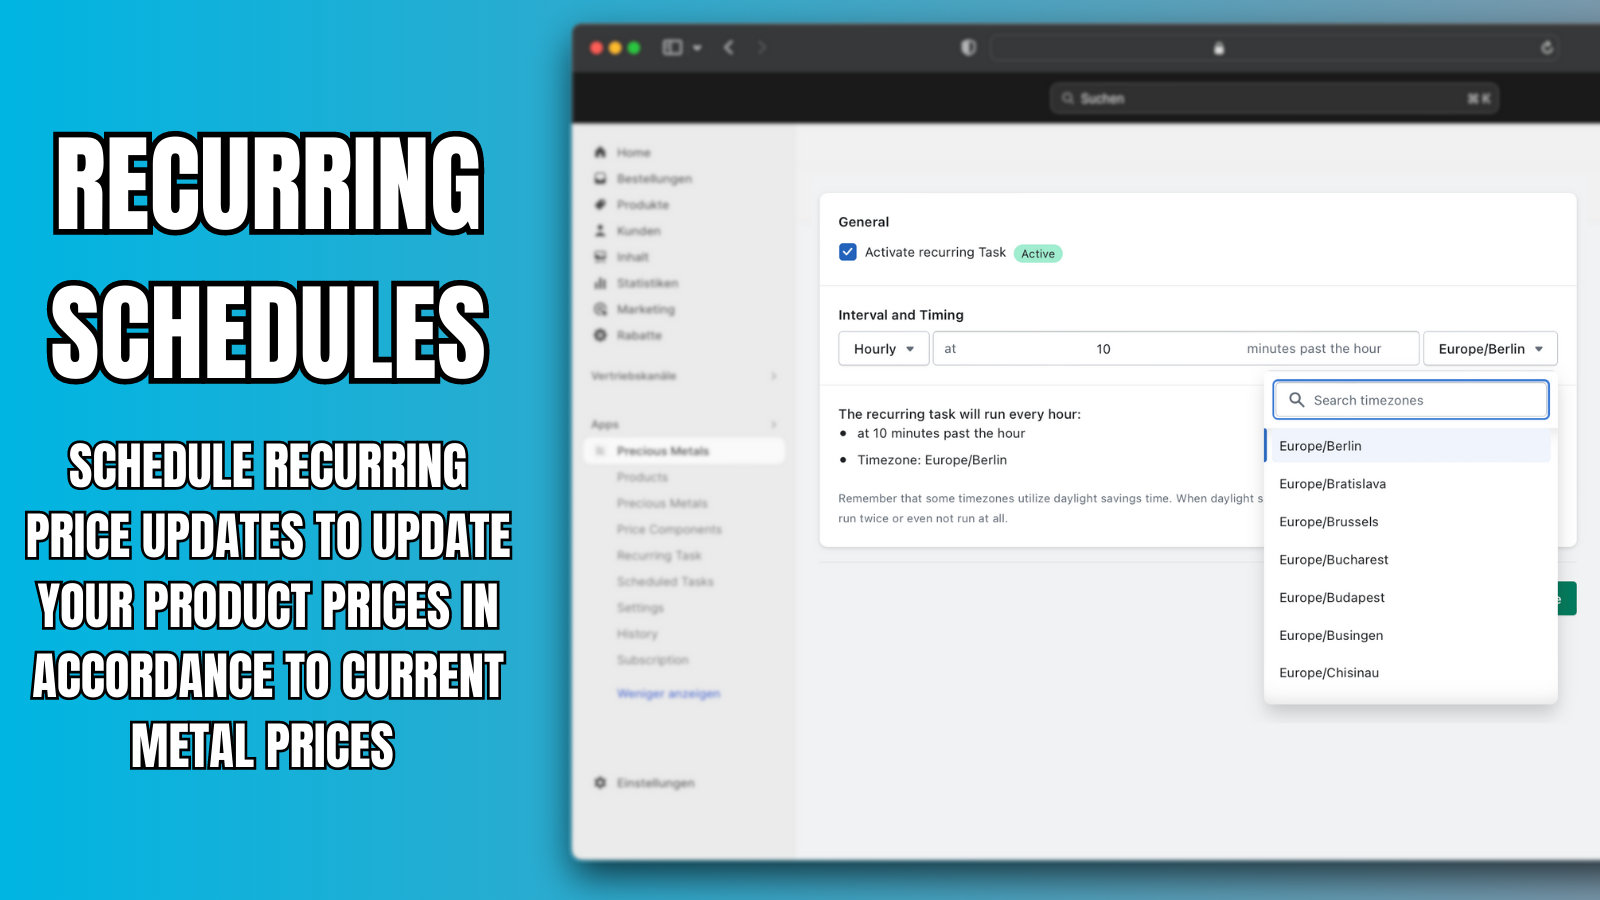 Recurring schedules to automate the update of product prices.